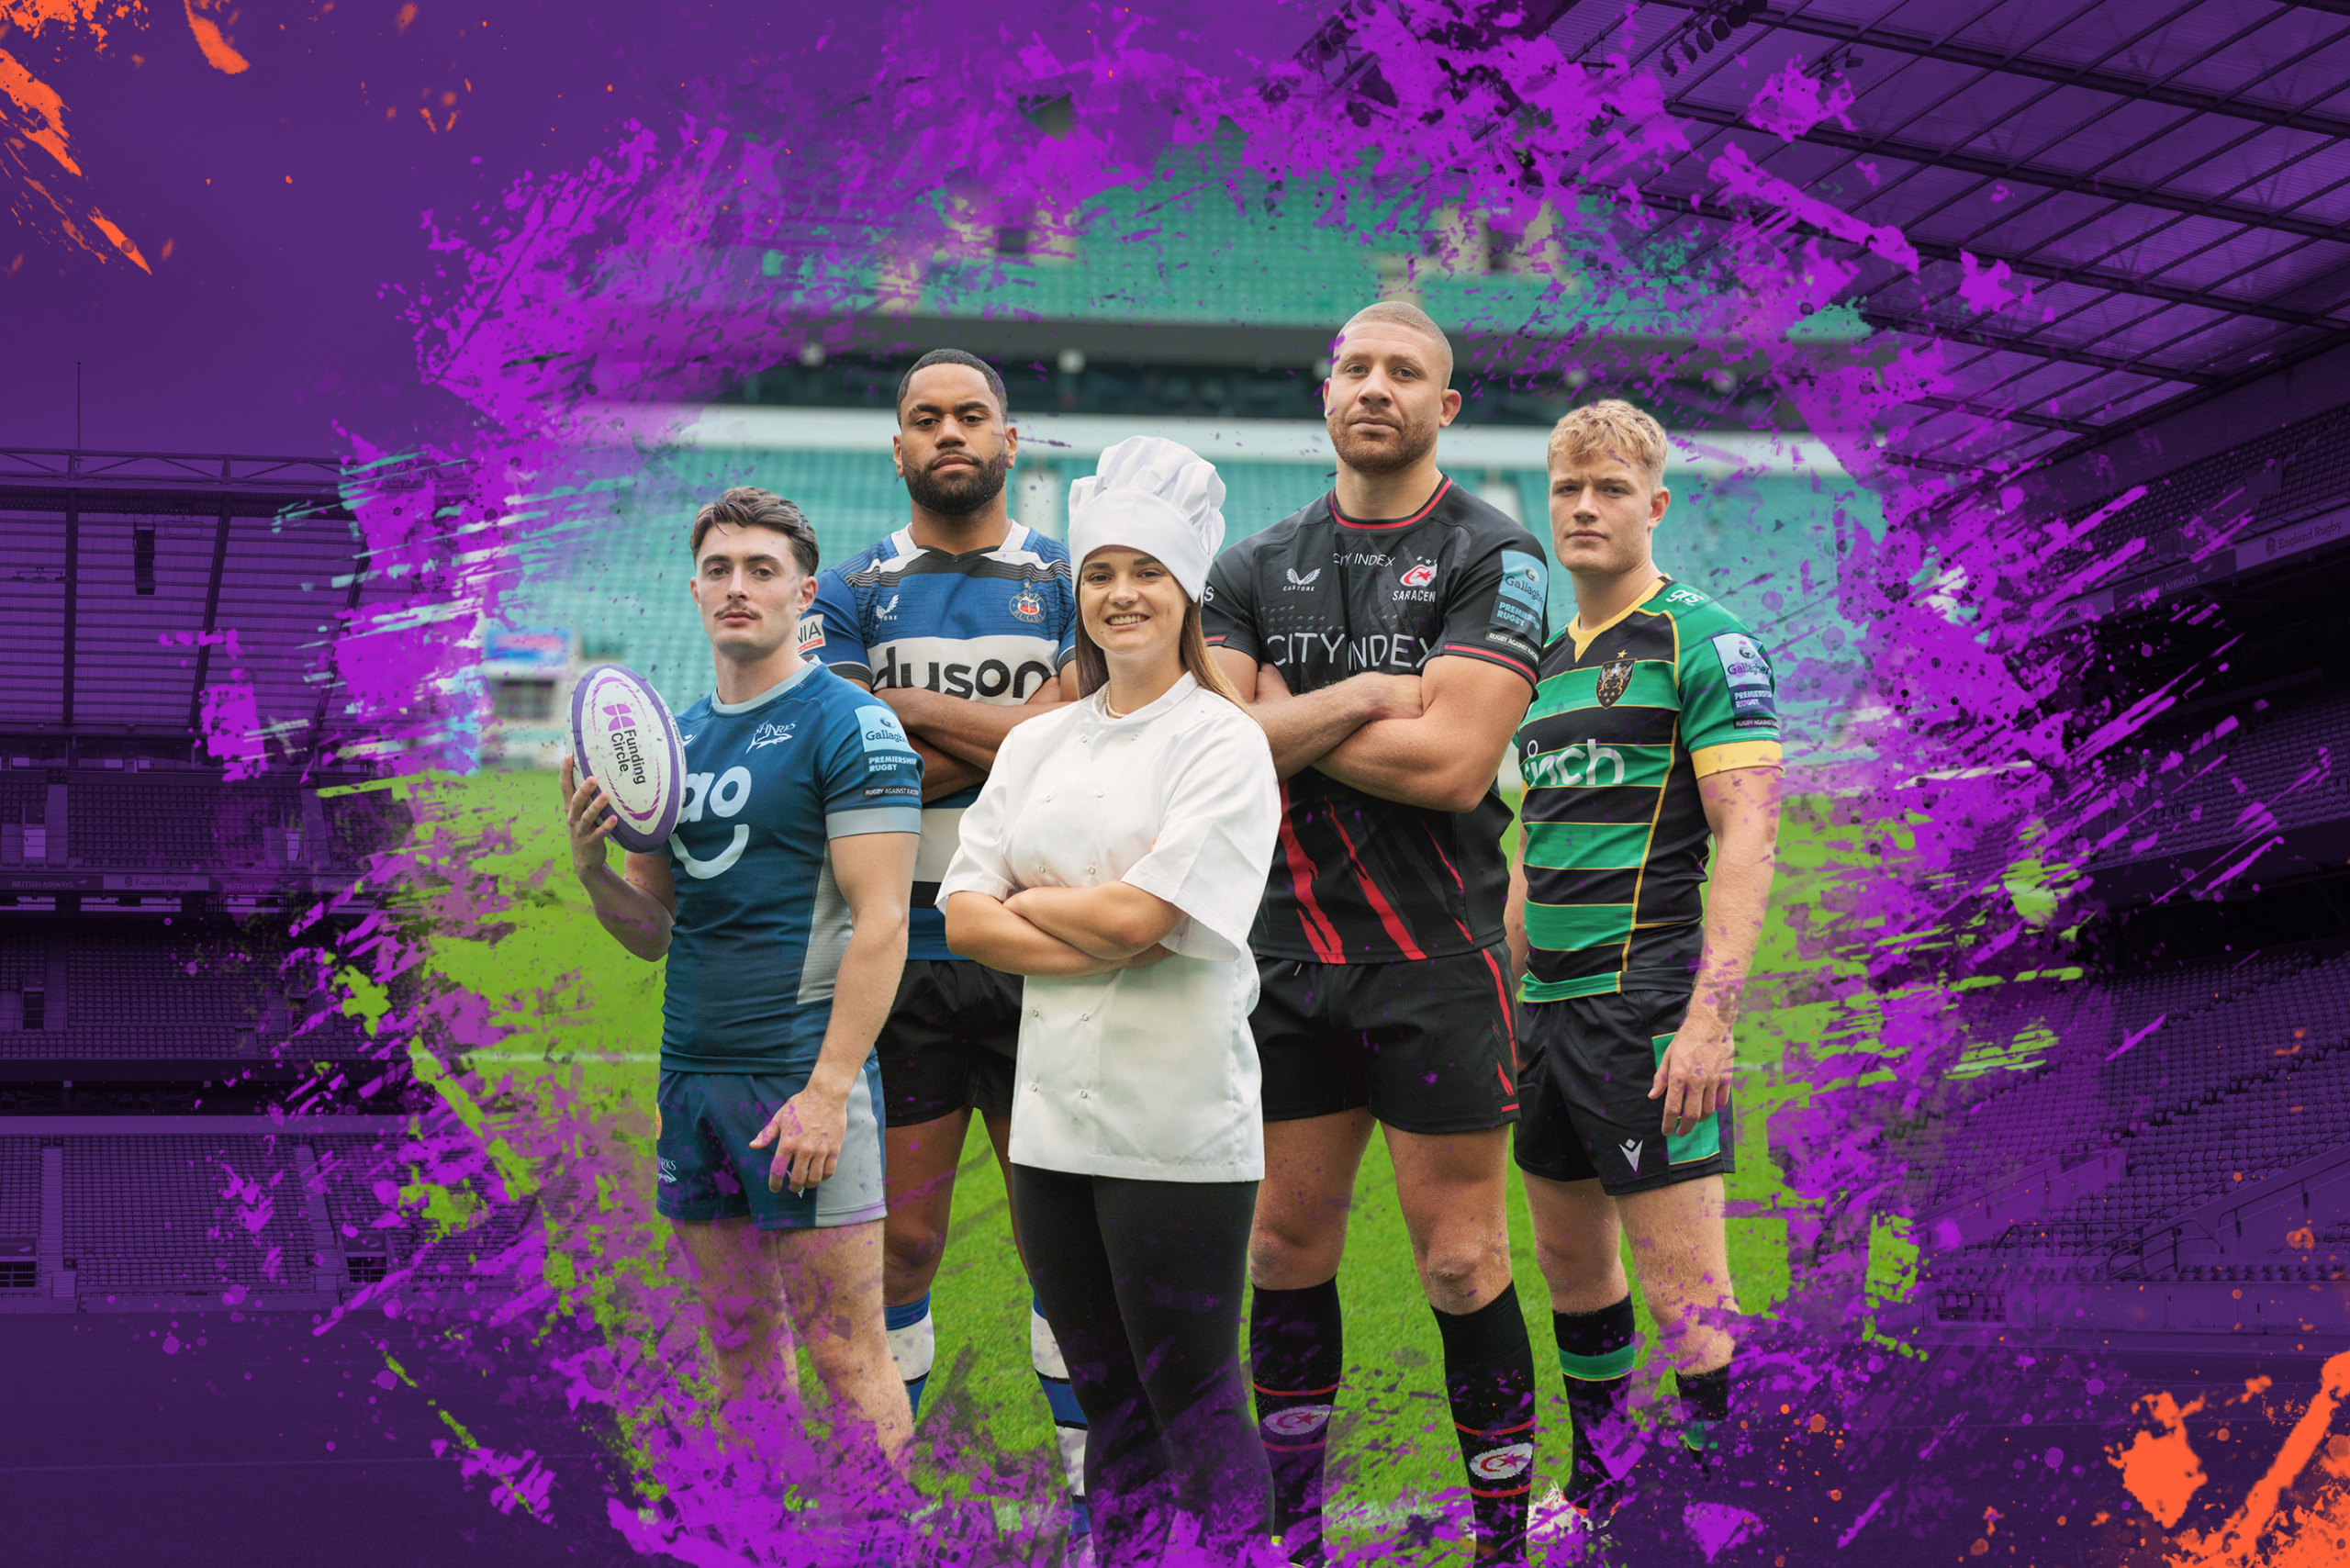 Backing businesses across the UK in partnership with Premiership Rugby